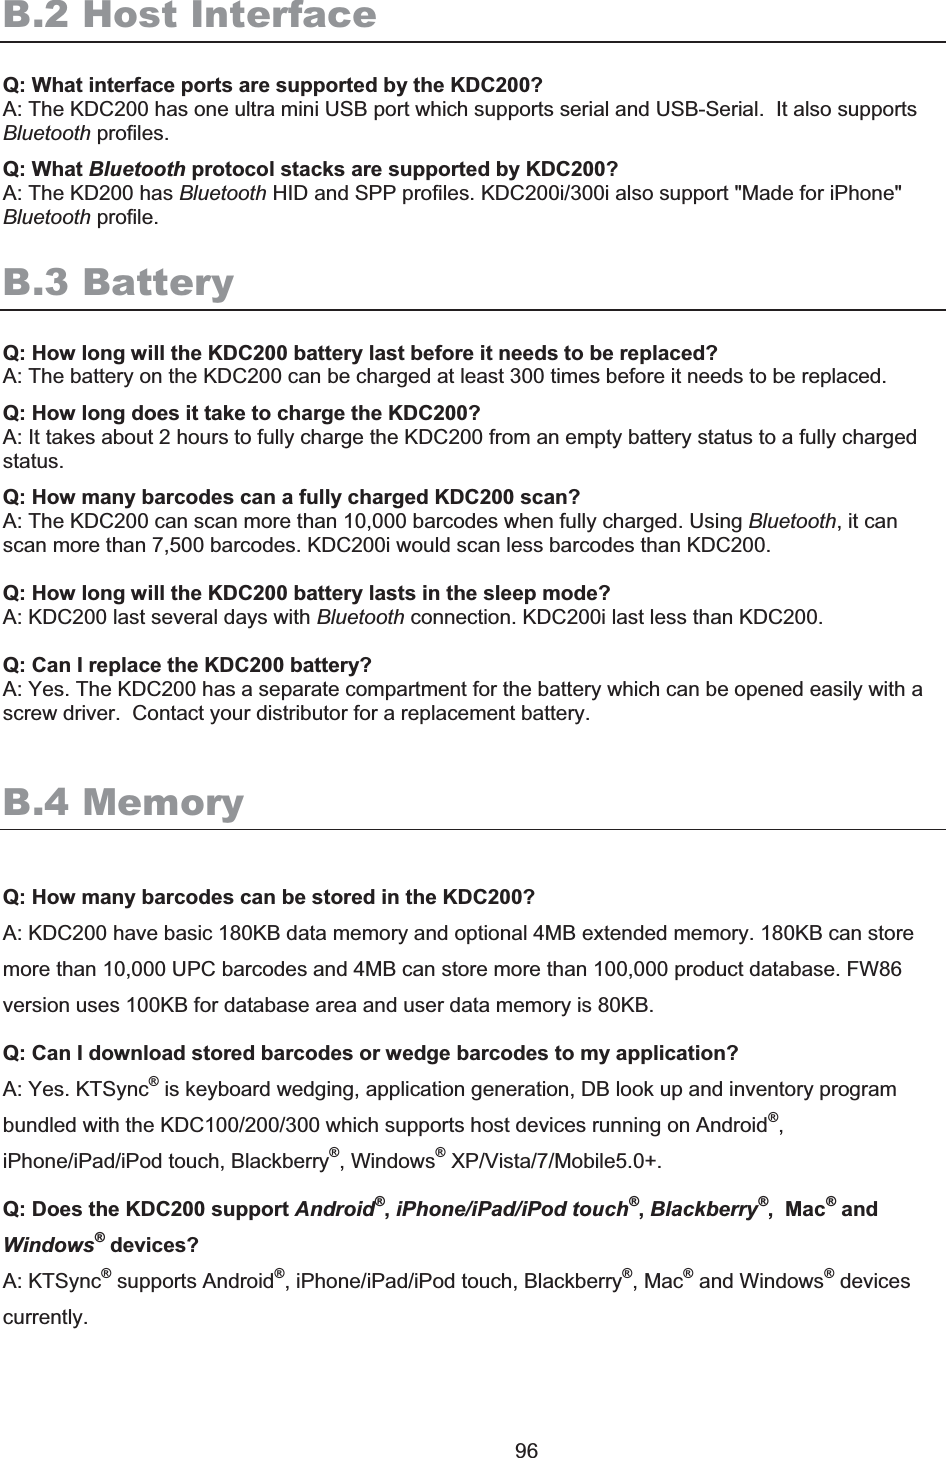 KDC250 User Manual 96 B.2 Host InterfaceQ: What interface ports are supported by the KDC200? A: The KDC200 has one ultra mini USB port which supports serial and USB-Serial.  It also supports Bluetooth profiles.Q: What Bluetooth protocol stacks are supported by KDC200? A: The KD200 has Bluetooth HID and SPP profiles. KDC200i/300i also support &quot;Made for iPhone&quot; Bluetooth profile. B.3 Battery Q: How long will the KDC200 battery last before it needs to be replaced? A: The battery on the KDC200 can be charged at least 300 times before it needs to be replaced.Q: How long does it take to charge the KDC200? A: It takes about 2 hours to fully charge the KDC200 from an empty battery status to a fully charged status. Q: How many barcodes can a fully charged KDC200 scan? A: The KDC200 can scan more than 10,000 barcodes when fully charged. Using Bluetooth, it can scan more than 7,500 barcodes. KDC200i would scan less barcodes than KDC200. Q: How long will the KDC200 battery lasts in the sleep mode? A: KDC200 last several days with Bluetooth connection. KDC200i last less than KDC200. Q: Can I replace the KDC200 battery? A: Yes. The KDC200 has a separate compartment for the battery which can be opened easily with a screw driver.  Contact your distributor for a replacement battery. B.4 Memory Q: How many barcodes can be stored in the KDC200? A: KDC200 have basic 180KB data memory and optional 4MB extended memory. 180KB can store more than 10,000 UPC barcodes and 4MB can store more than 100,000 product database. FW86 version uses 100KB for database area and user data memory is 80KB. Q: Can I download stored barcodes or wedge barcodes to my application? A: Yes. KTSync® is keyboard wedging, application generation, DB look up and inventory program bundled with the KDC100/200/300 which supports host devices running on Android®,iPhone/iPad/iPod touch, Blackberry®, Windows® XP/Vista/7/Mobile5.0+. Q: Does the KDC200 support Android®,iPhone/iPad/iPod touch®,Blackberry®,  Mac® and Windows®devices? A: KTSync® supports Android®, iPhone/iPad/iPod touch, Blackberry®, Mac® and Windows® devices currently.